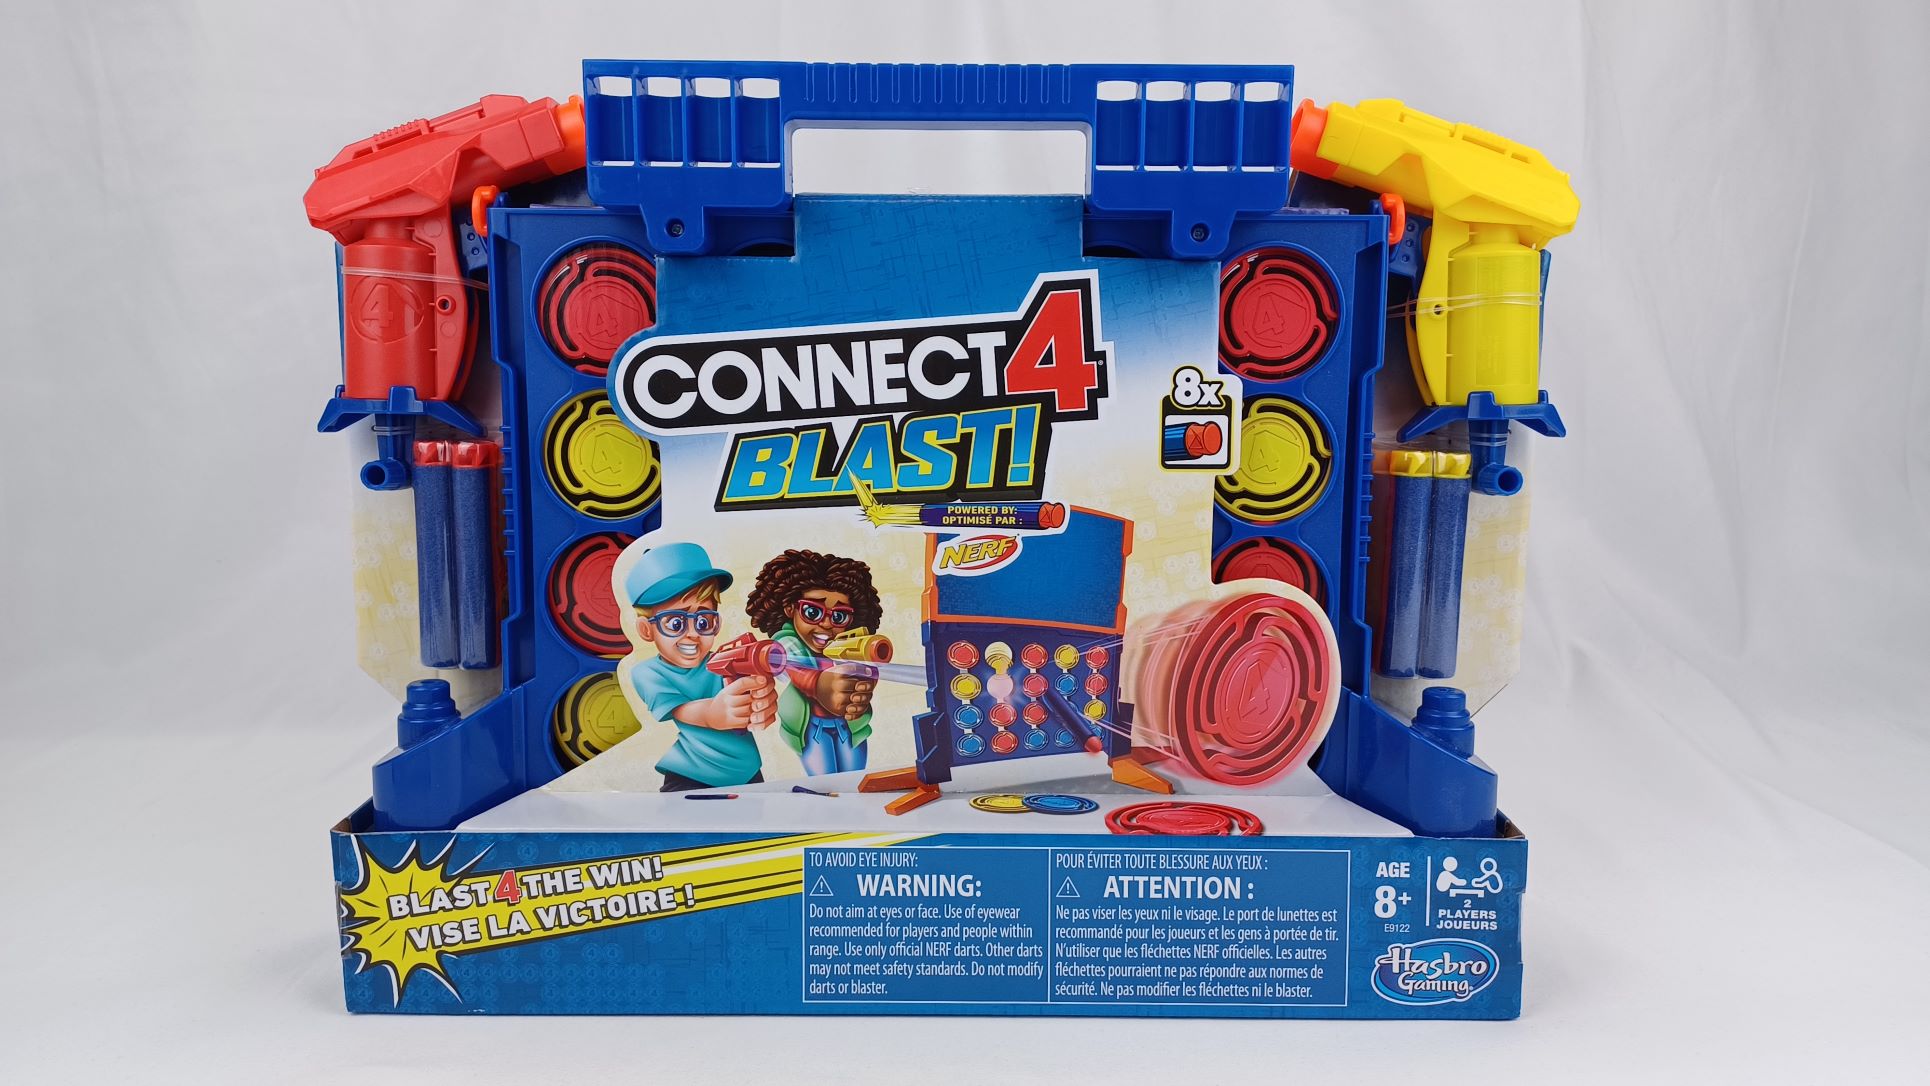 Connect 4 Blast New 2020 Game Review from Hasbro 